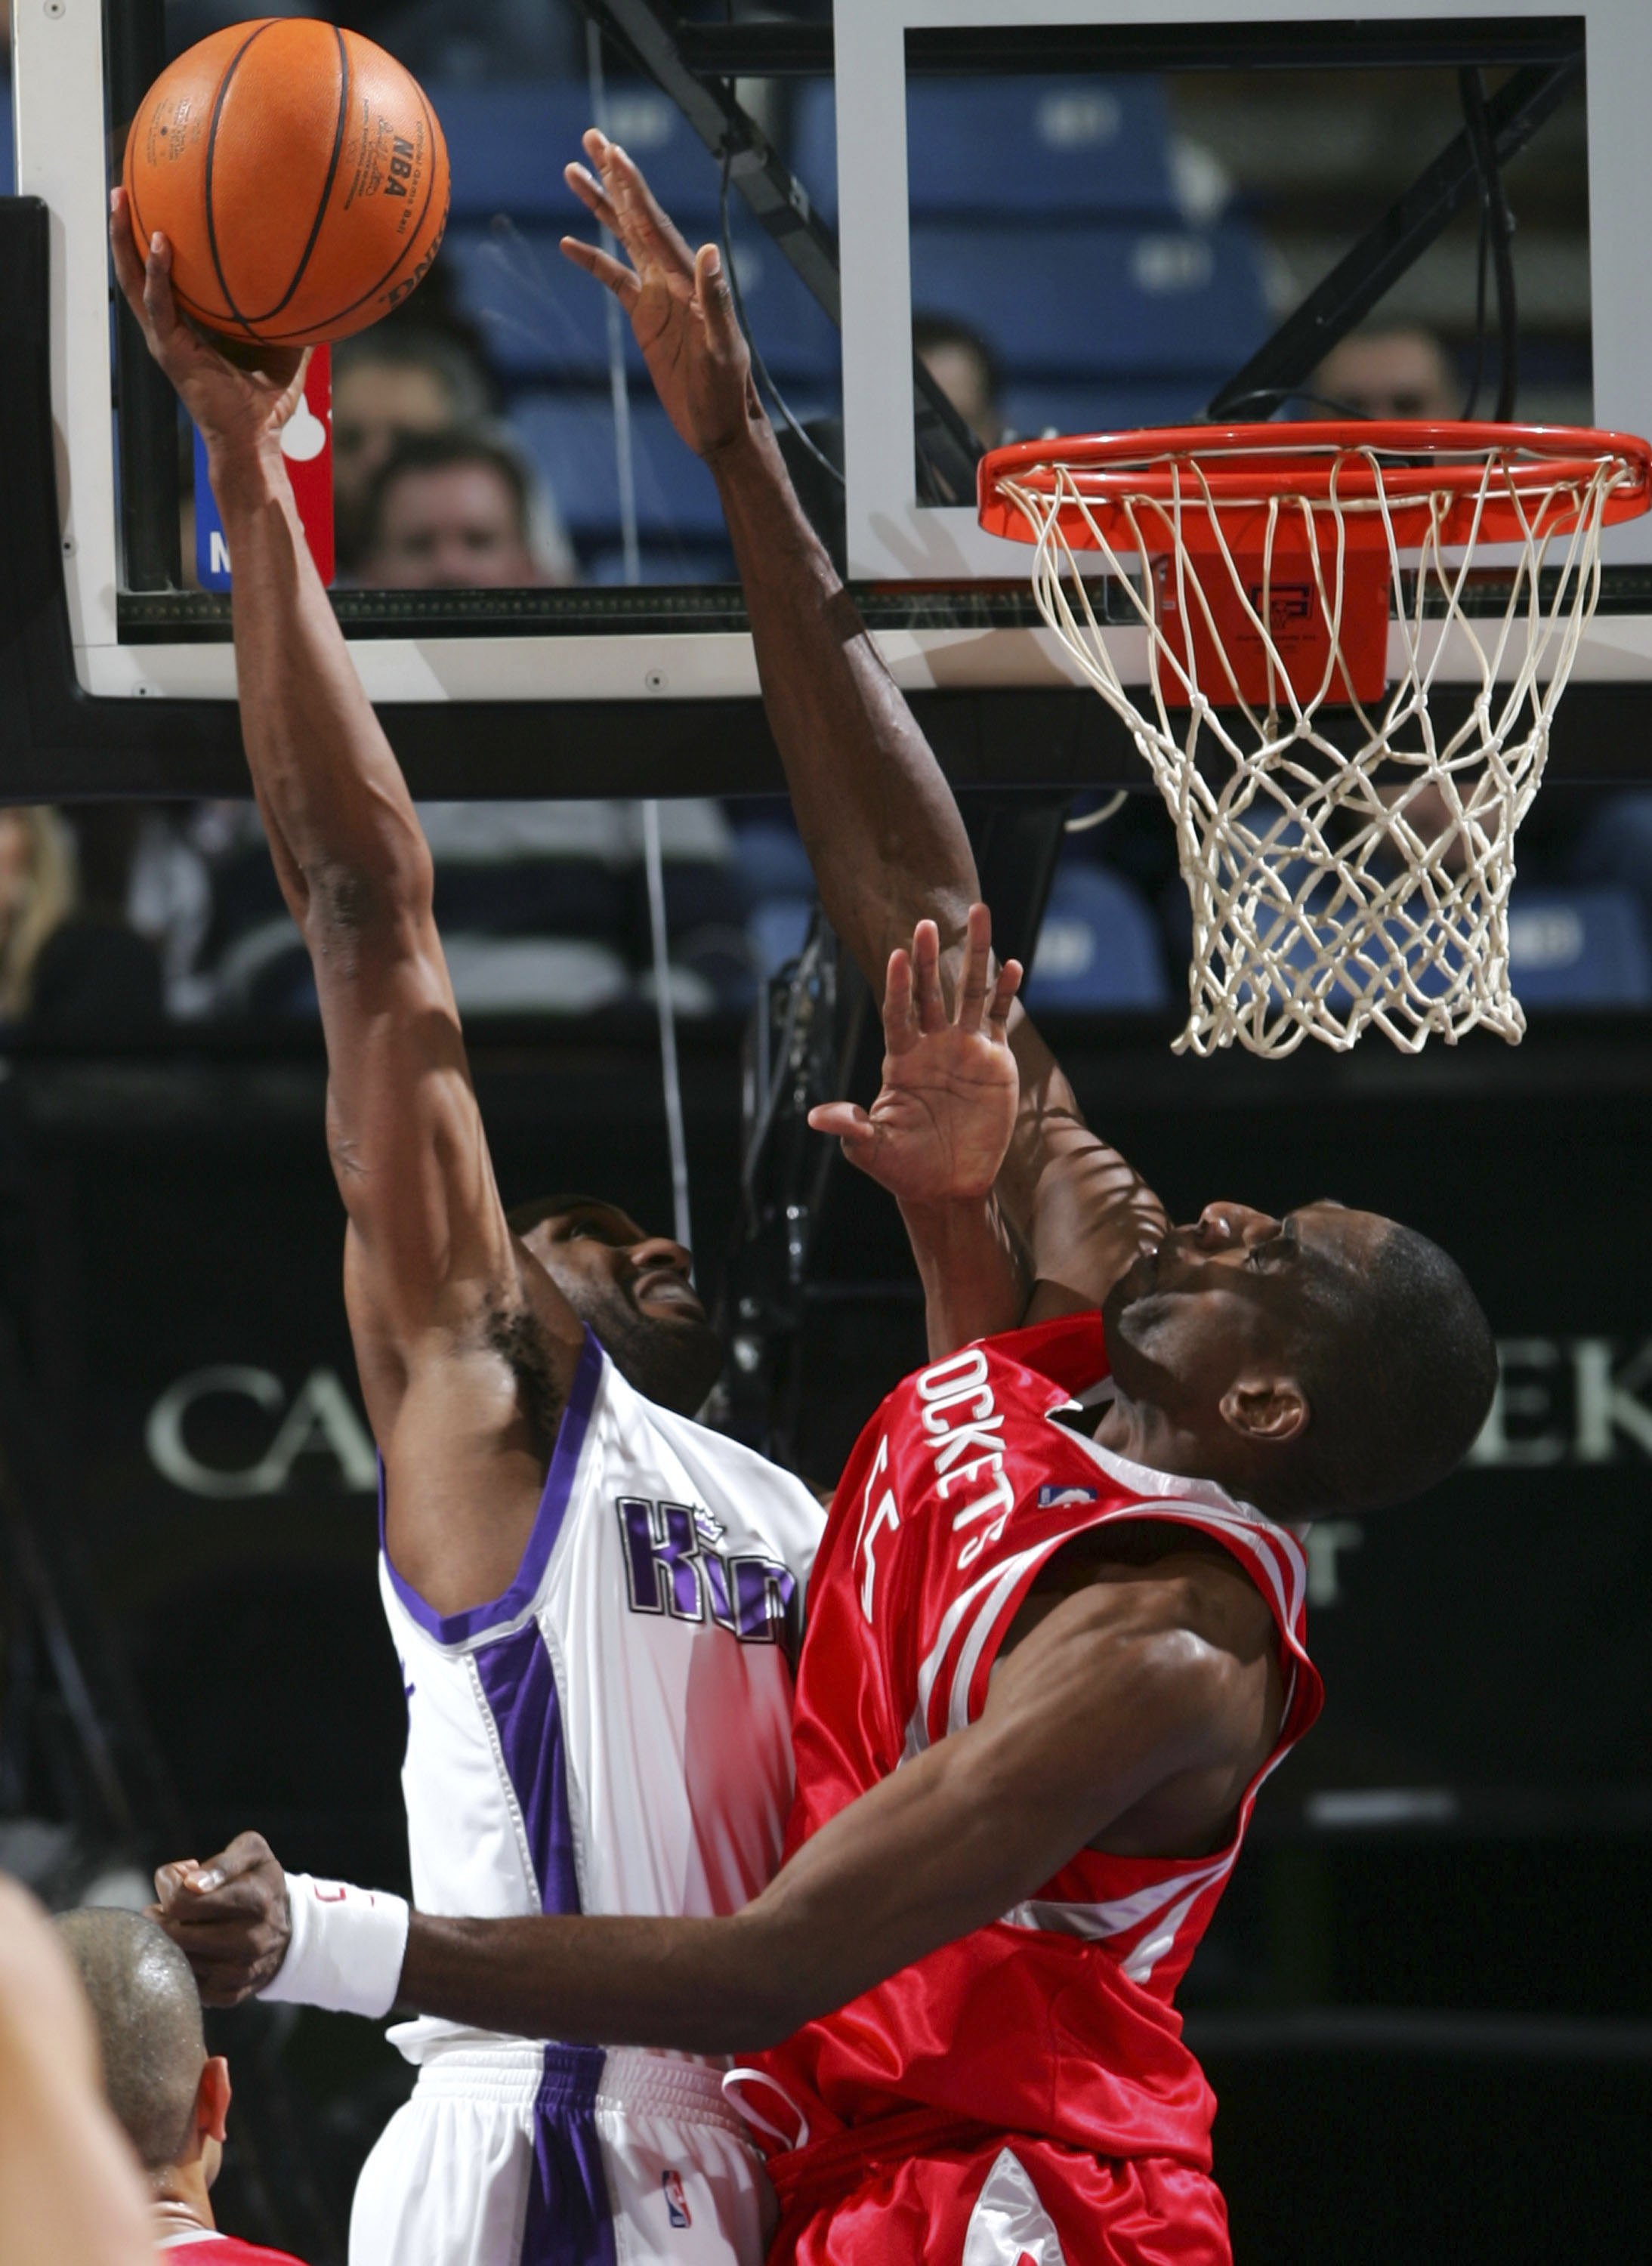 SACRAMENTO, CA - JANUARY 13:  Dikembe Mutombo #55 of the Houston Rockets tries to block a shot from Shareef Abdur-Rahim #3 of the Sacramento Kings during an NBA game at Arco Arena January 13, 2007 in Sacramento, California.  NOTE TO USER: User expressly a